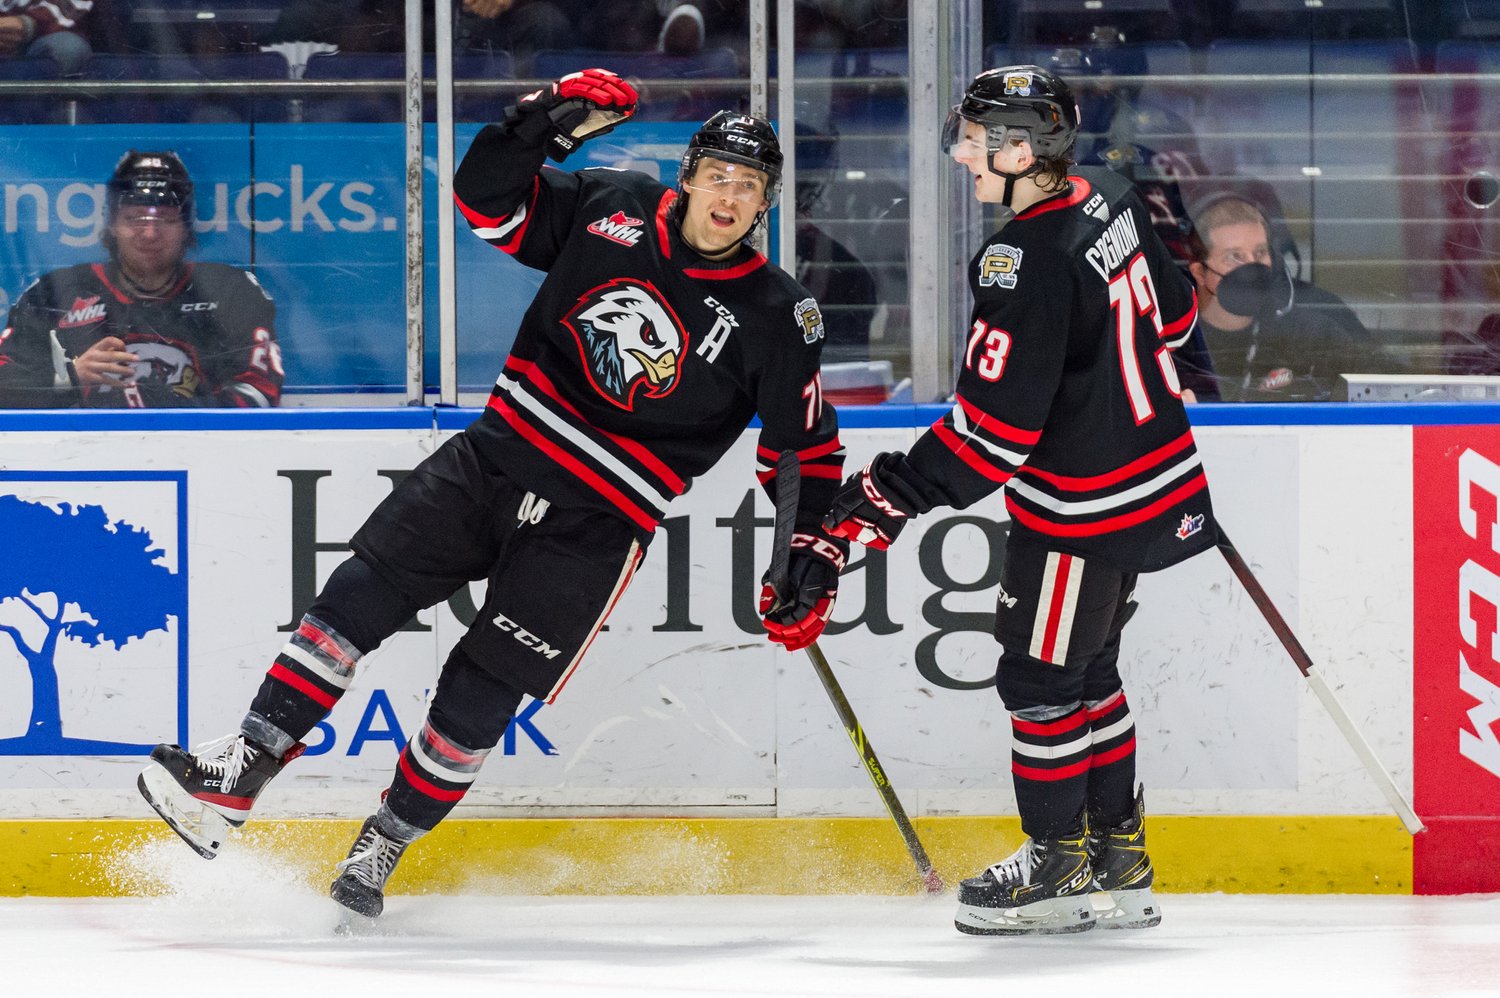 Cross Hanas and Luca Cagnoni celebrate a shorthanded empty net goal as Marek Alscher sits in the Penalty Box for the Portland Winterhawks